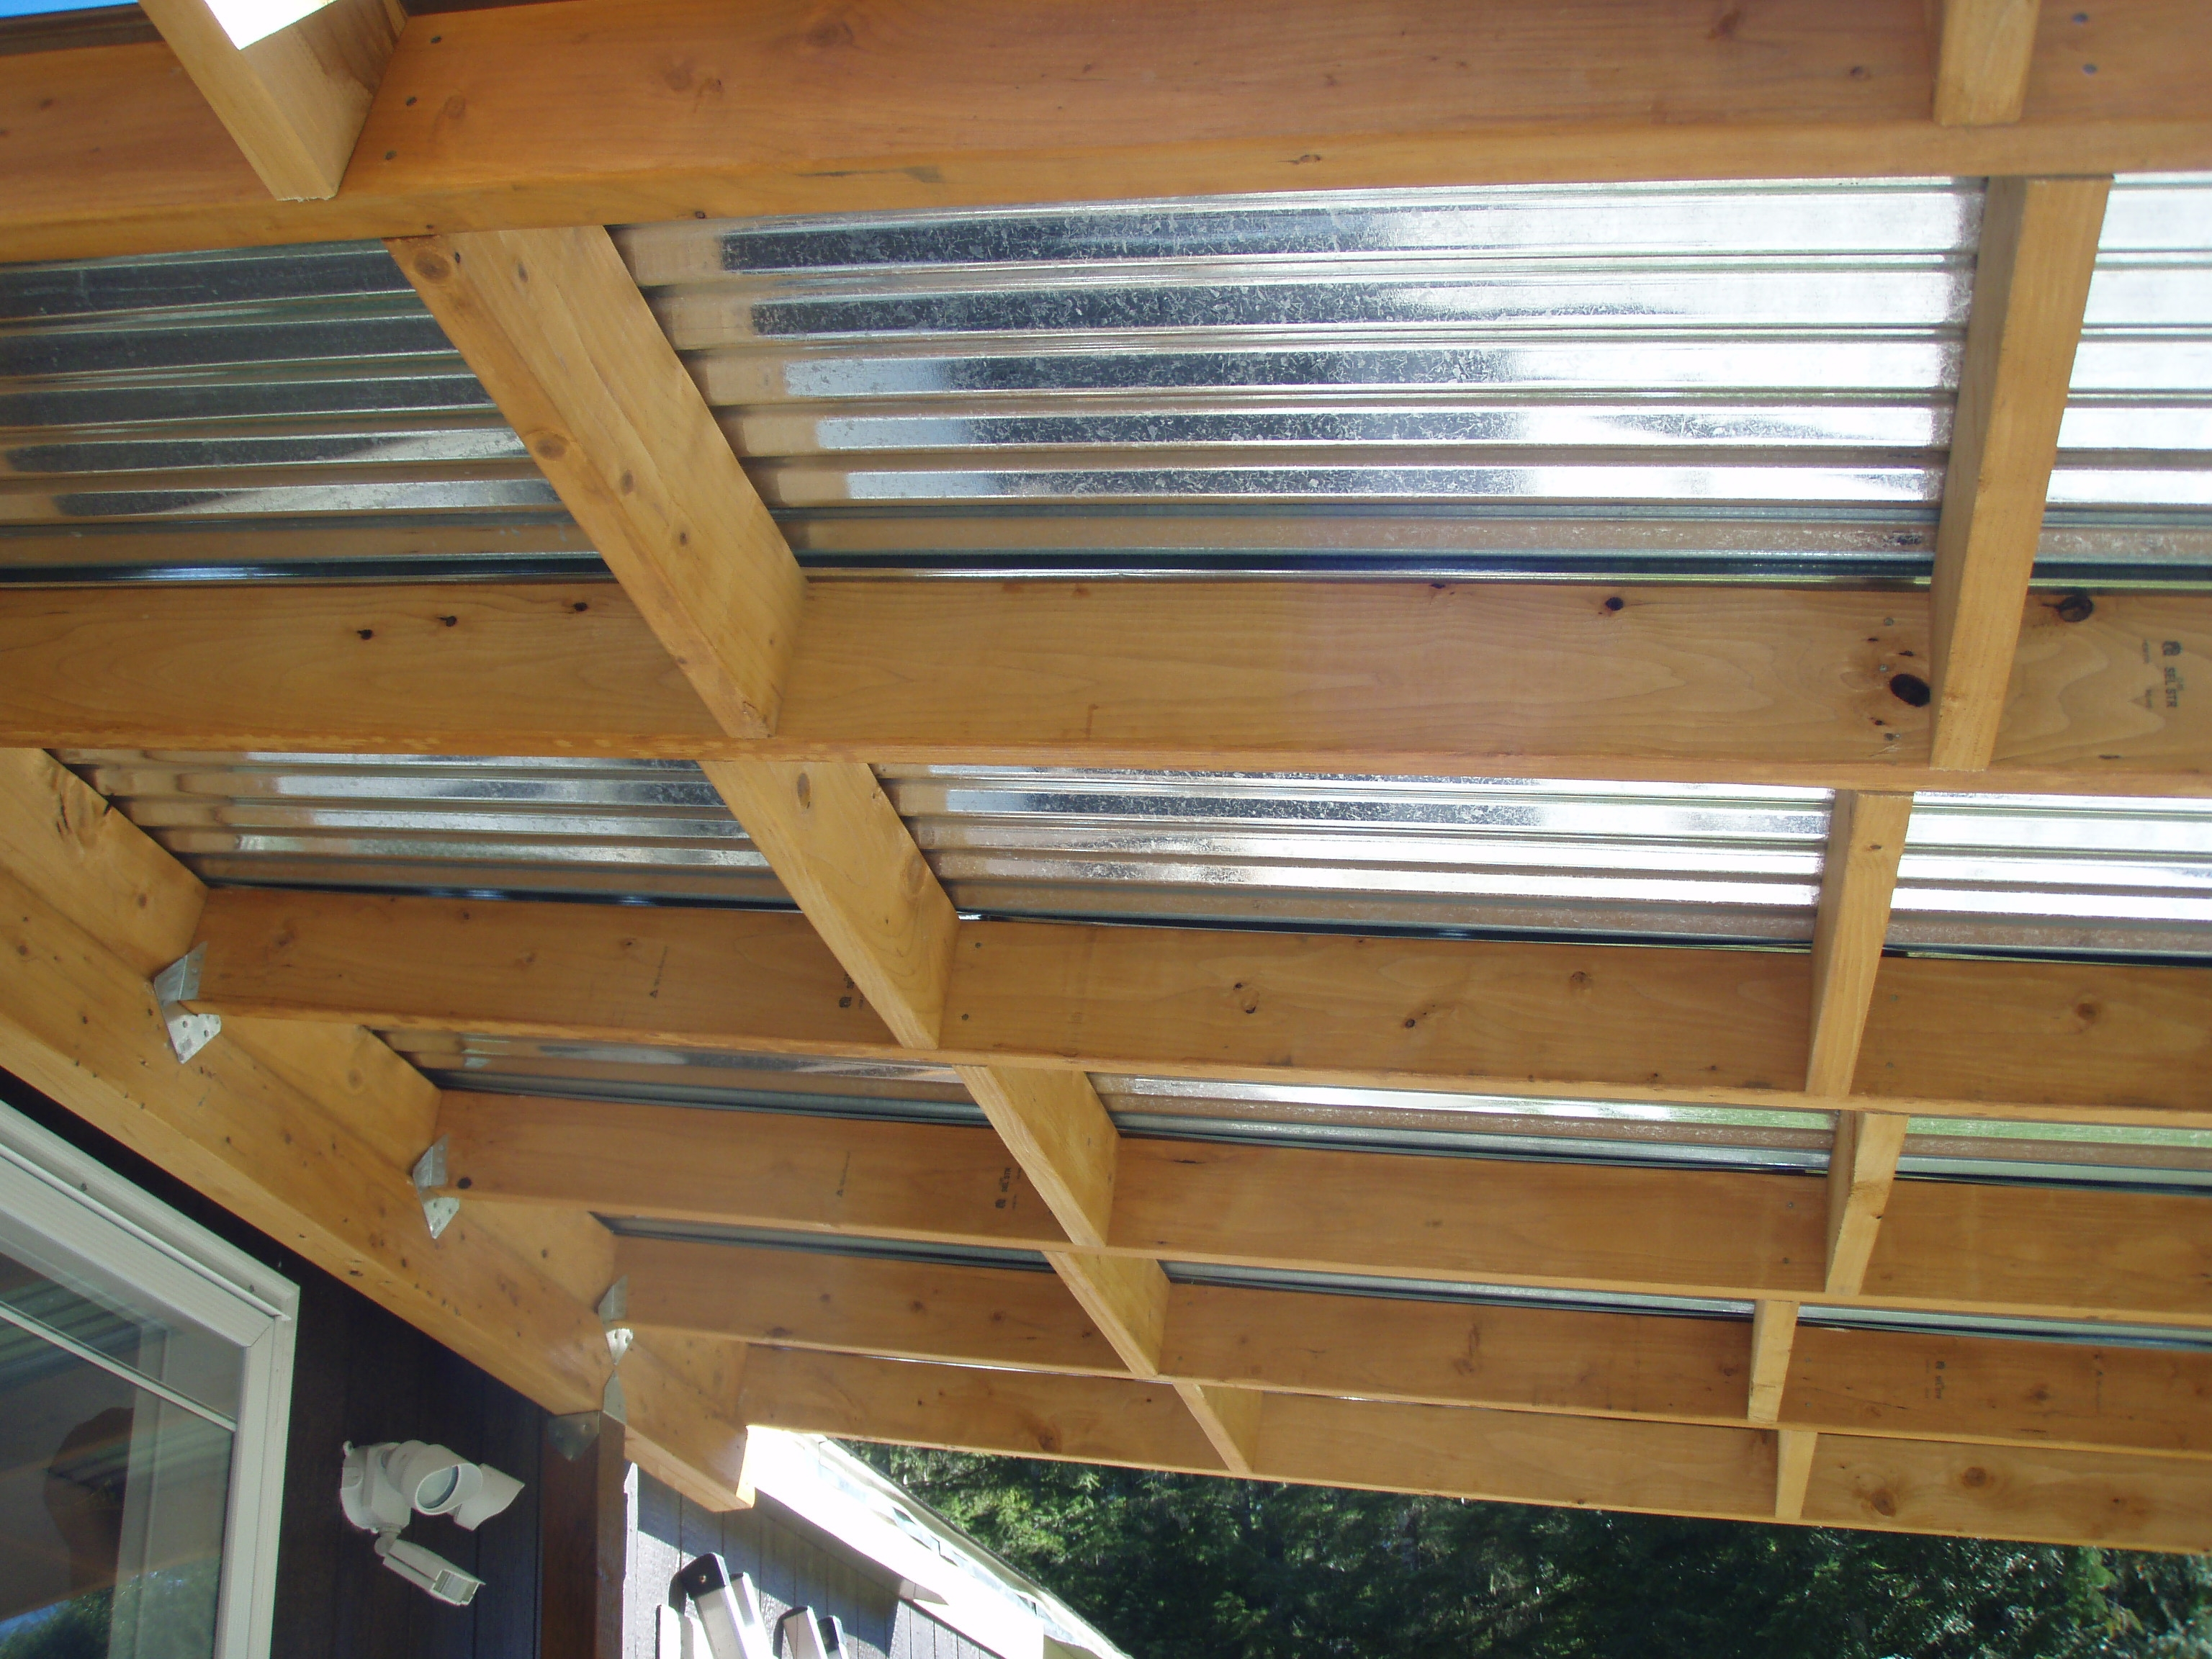 Corrugated Metal Roofing Under Deck pertaining to dimensions 3072 X 2304